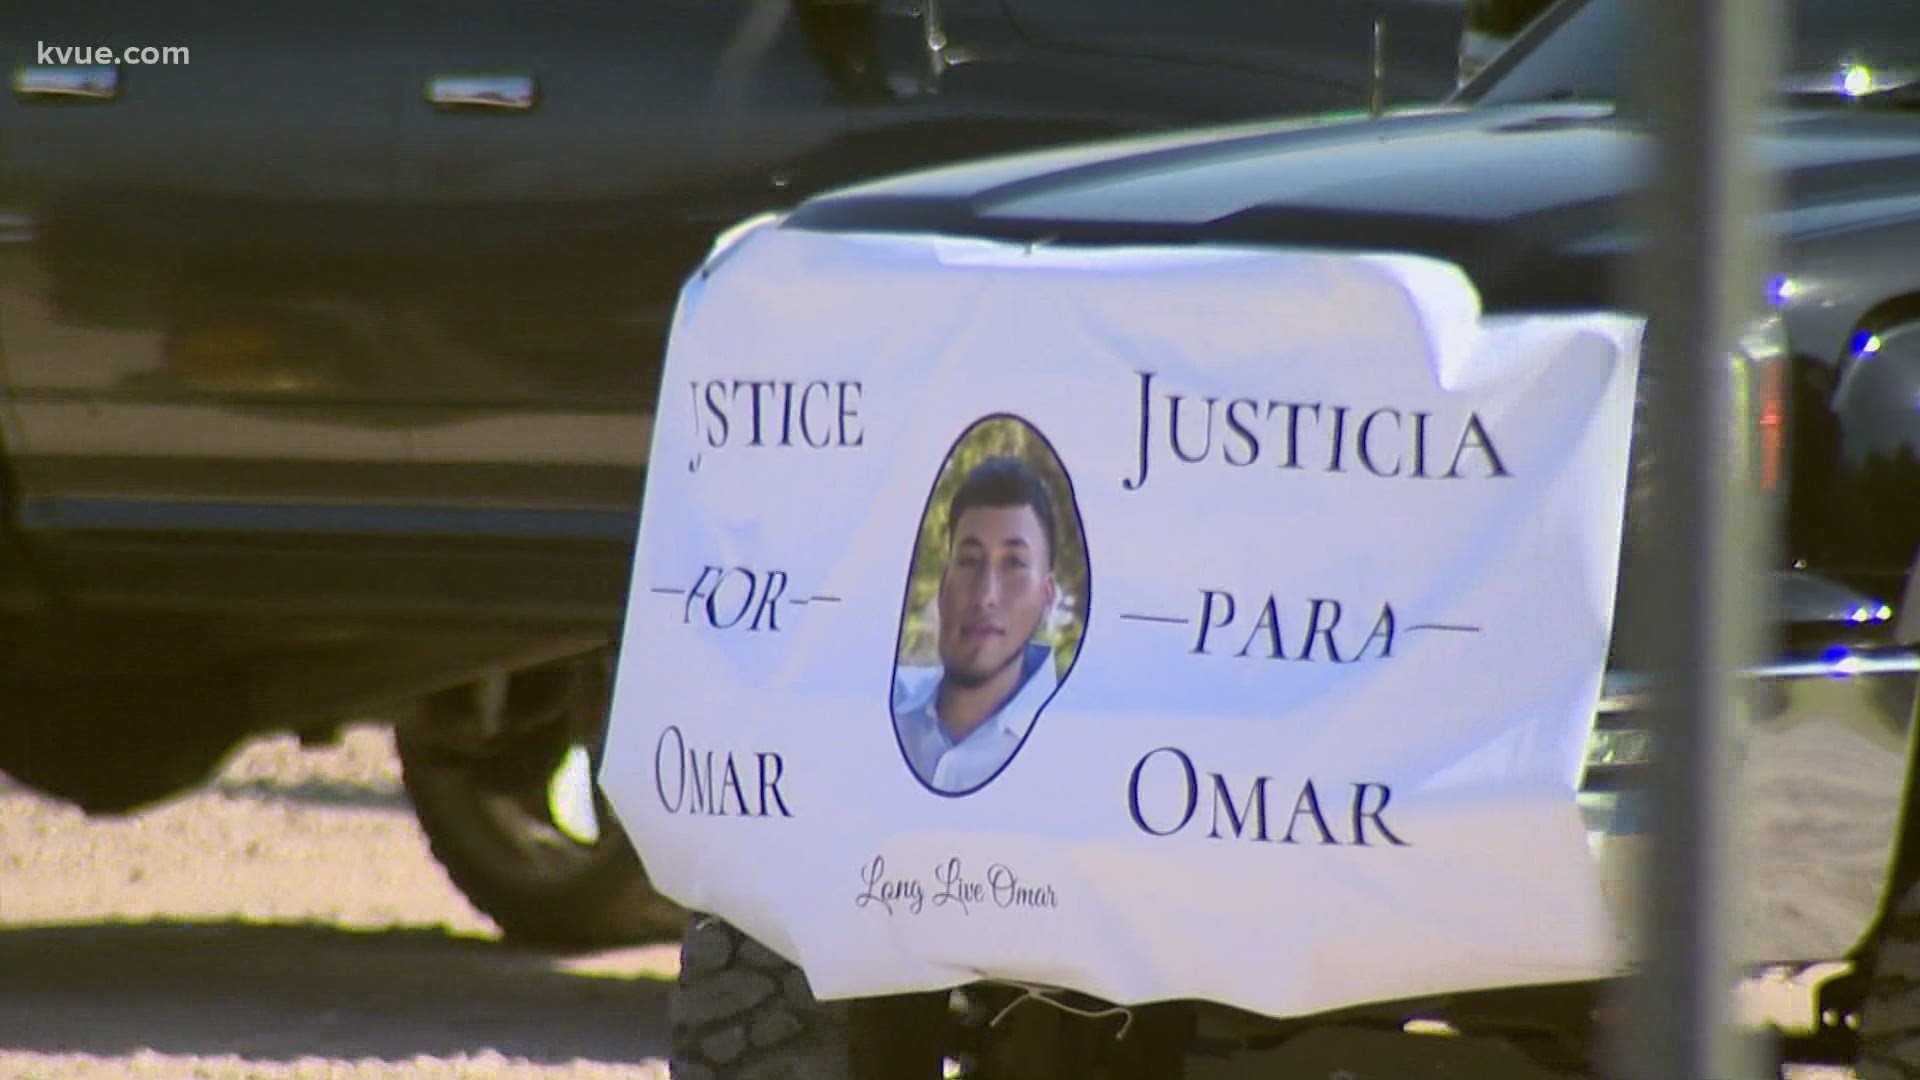 Family and friends gathered to remember Omar Munguia, a road rage victim who was killed a little over two months ago in southeast Austin.